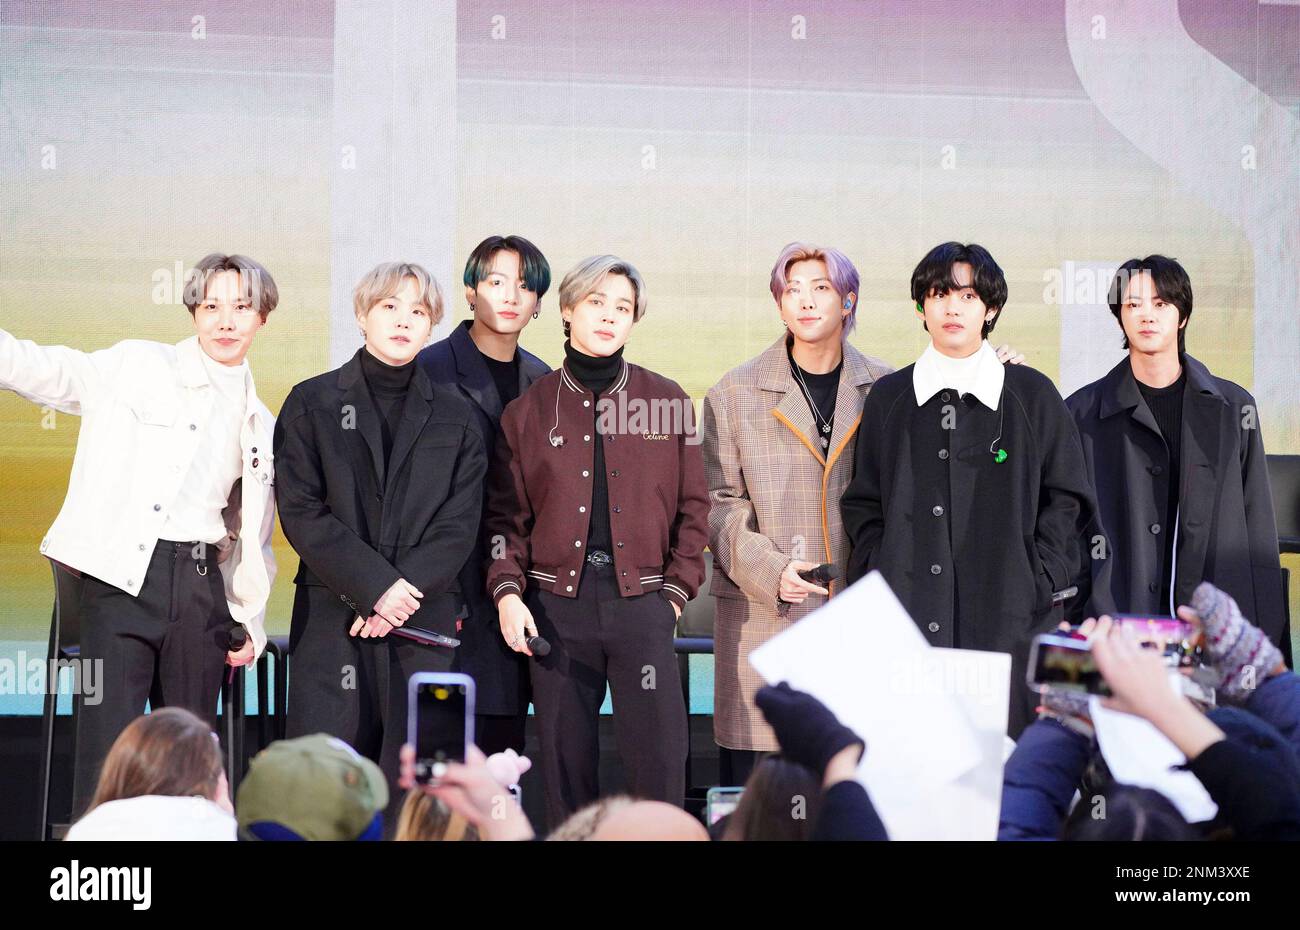 BTS pictured in New York City as they promote Map Of The Soul Persona